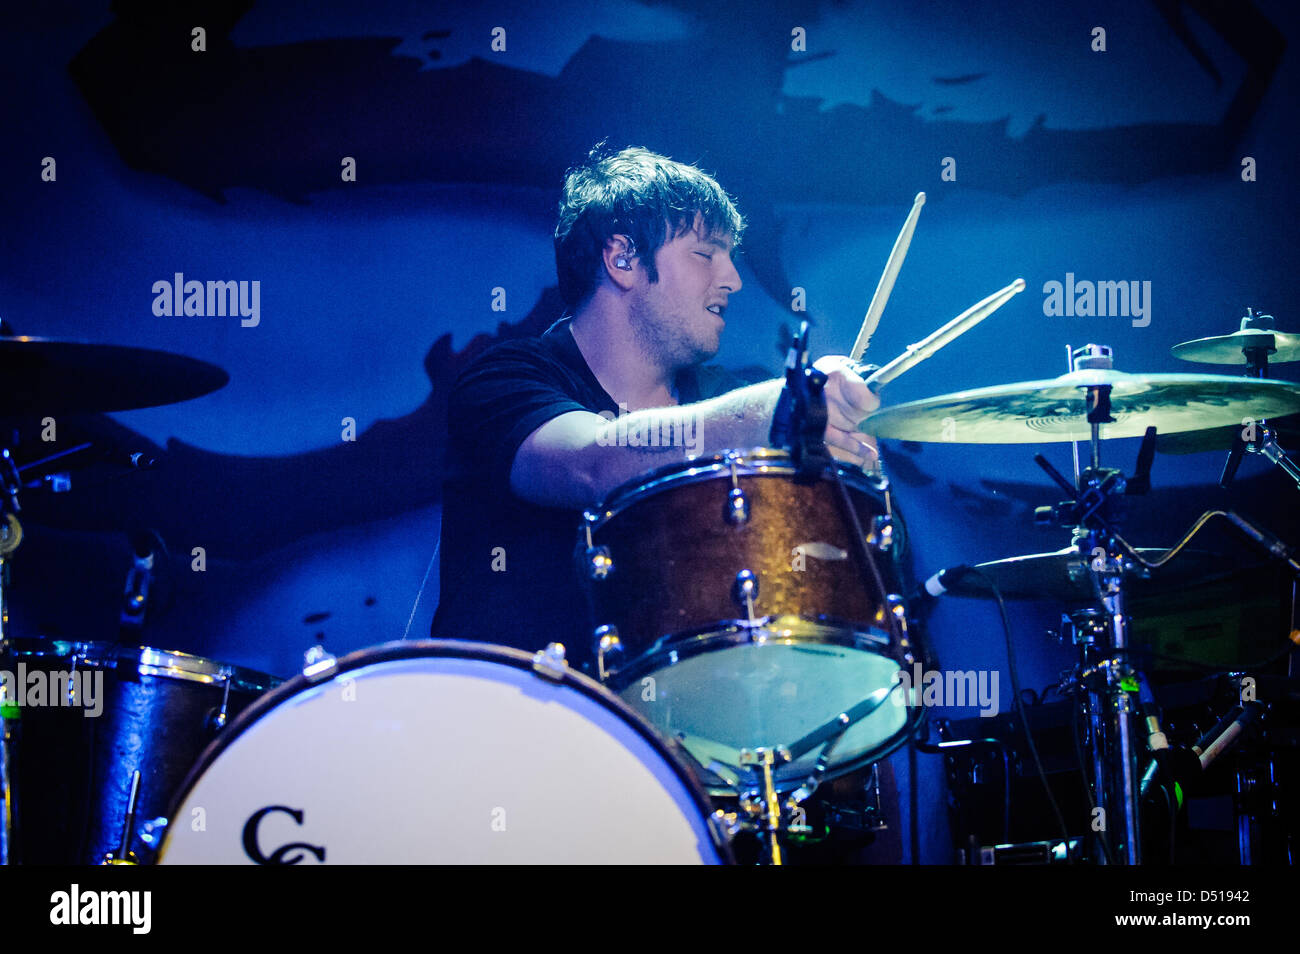 March 21, 2013 - Toronto, Ontario, Canada - American rock band 'Coheed and Cambria' performs on stage at Sound Academy in Toronto. In picture - drummer JOSH EPPARD (Credit Image: © Igor Vidyashev/ZUMAPRESS.com) Stock Photo